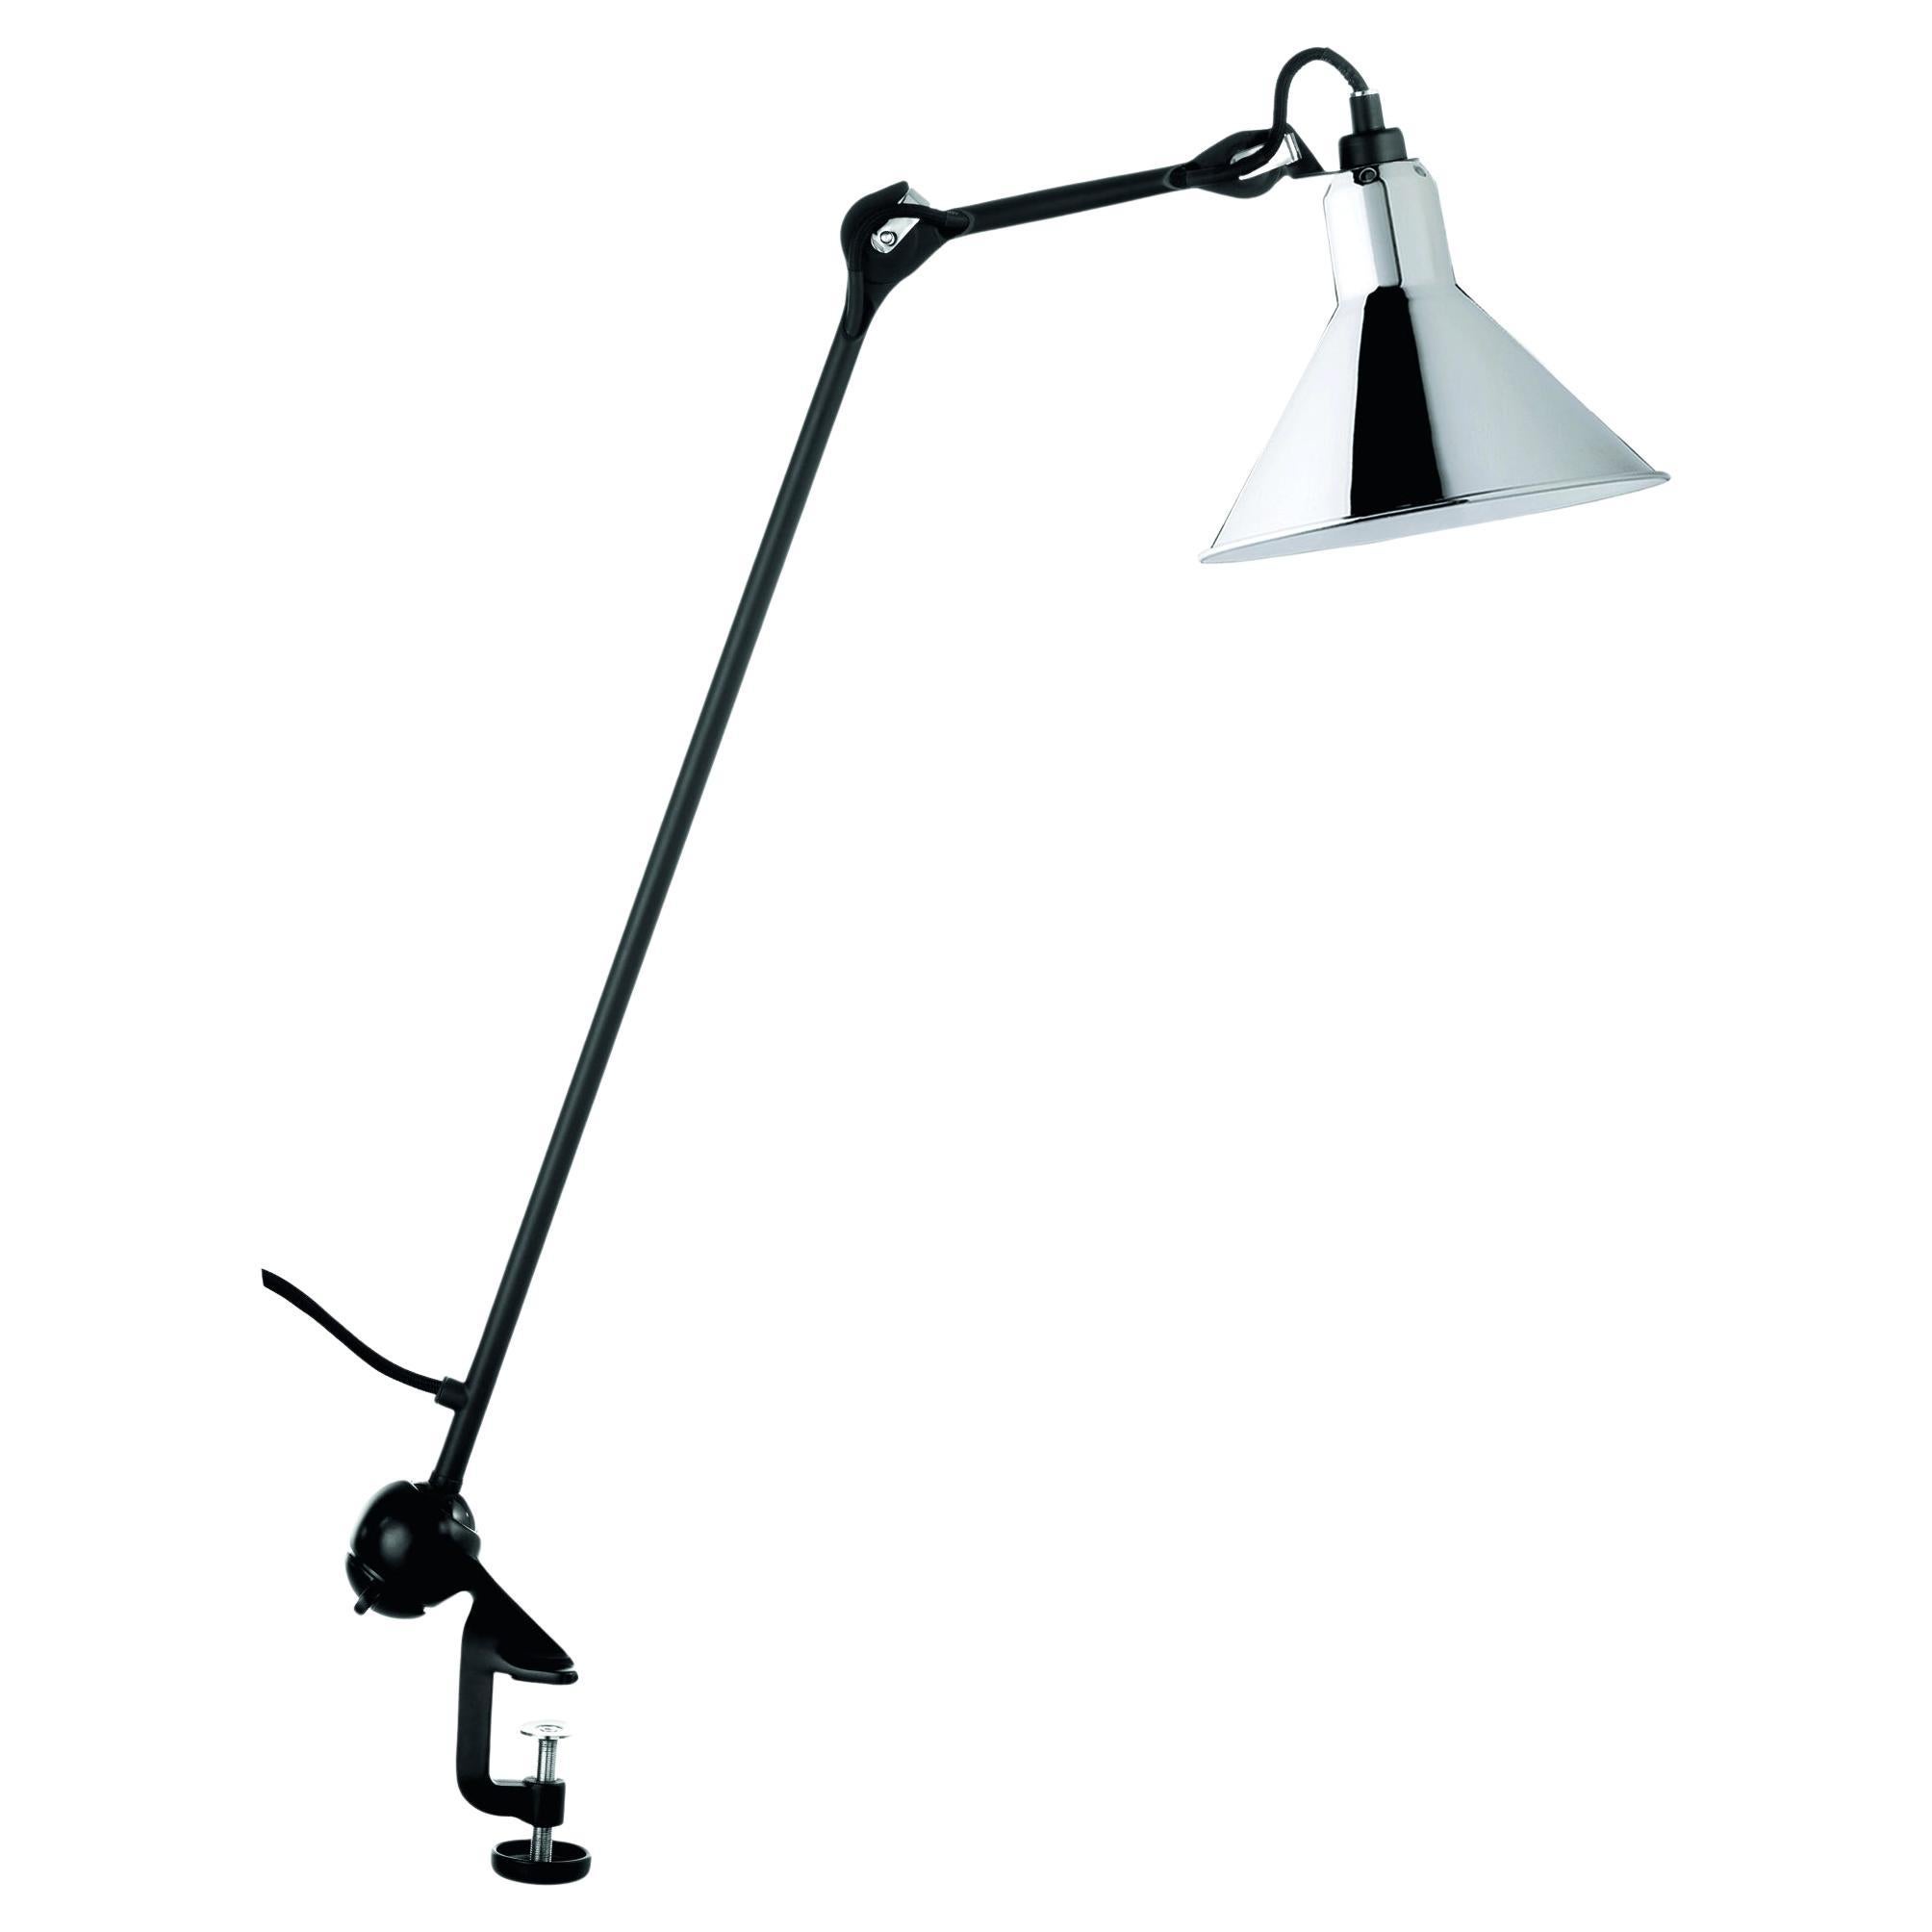 DCW Editions La Lampe Gras N°201 Conic Table Lamp in Black Arm and Chrome Shade For Sale